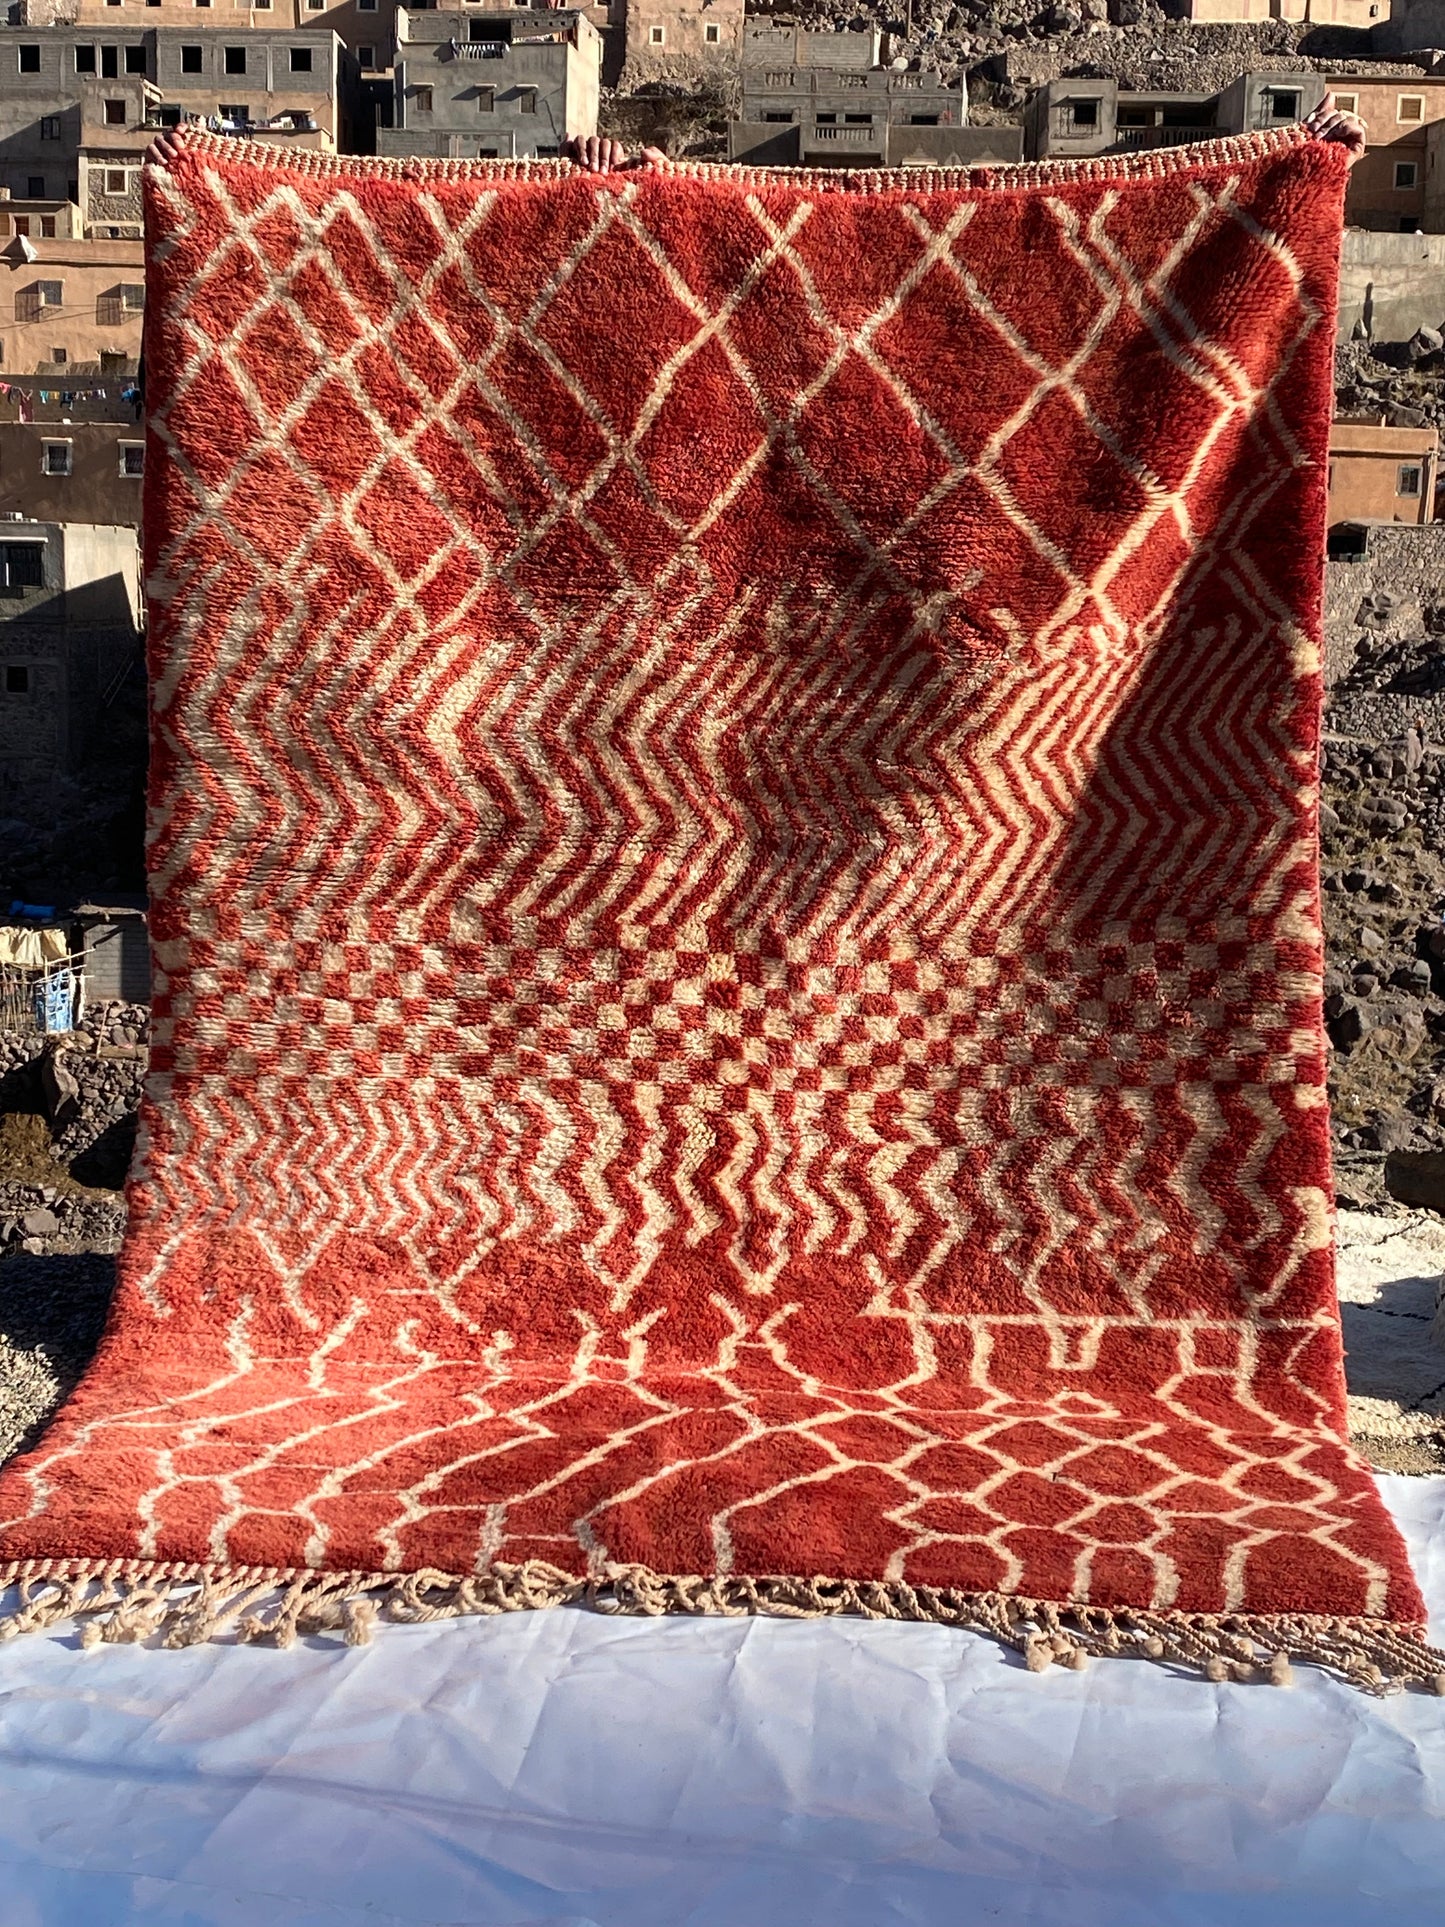 Beni Ourain rugs originate from the Atlas Mountains of Morocco and are characterized by their distinctive, neutral-toned, and geometric designs. These handwoven rugs often feature a plush pile and are made by the Berber tribes,  size is 270x168 cm